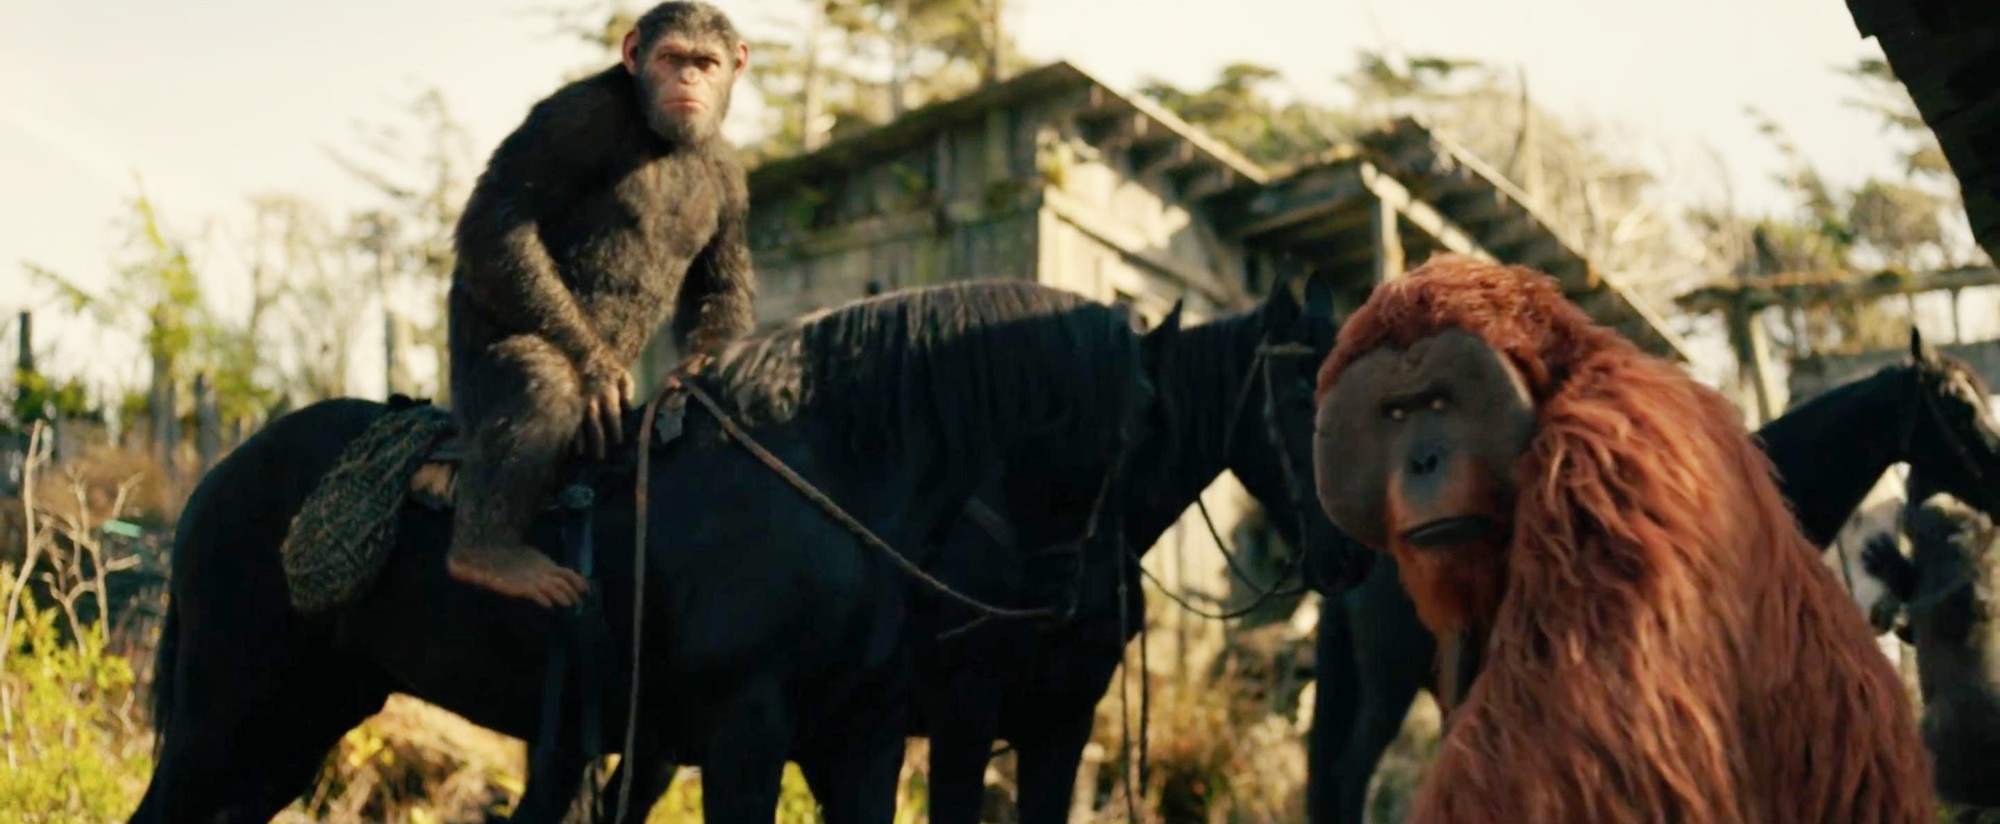 Maurice from 20th Century Fox's War for the Planet of the Apes (2017)